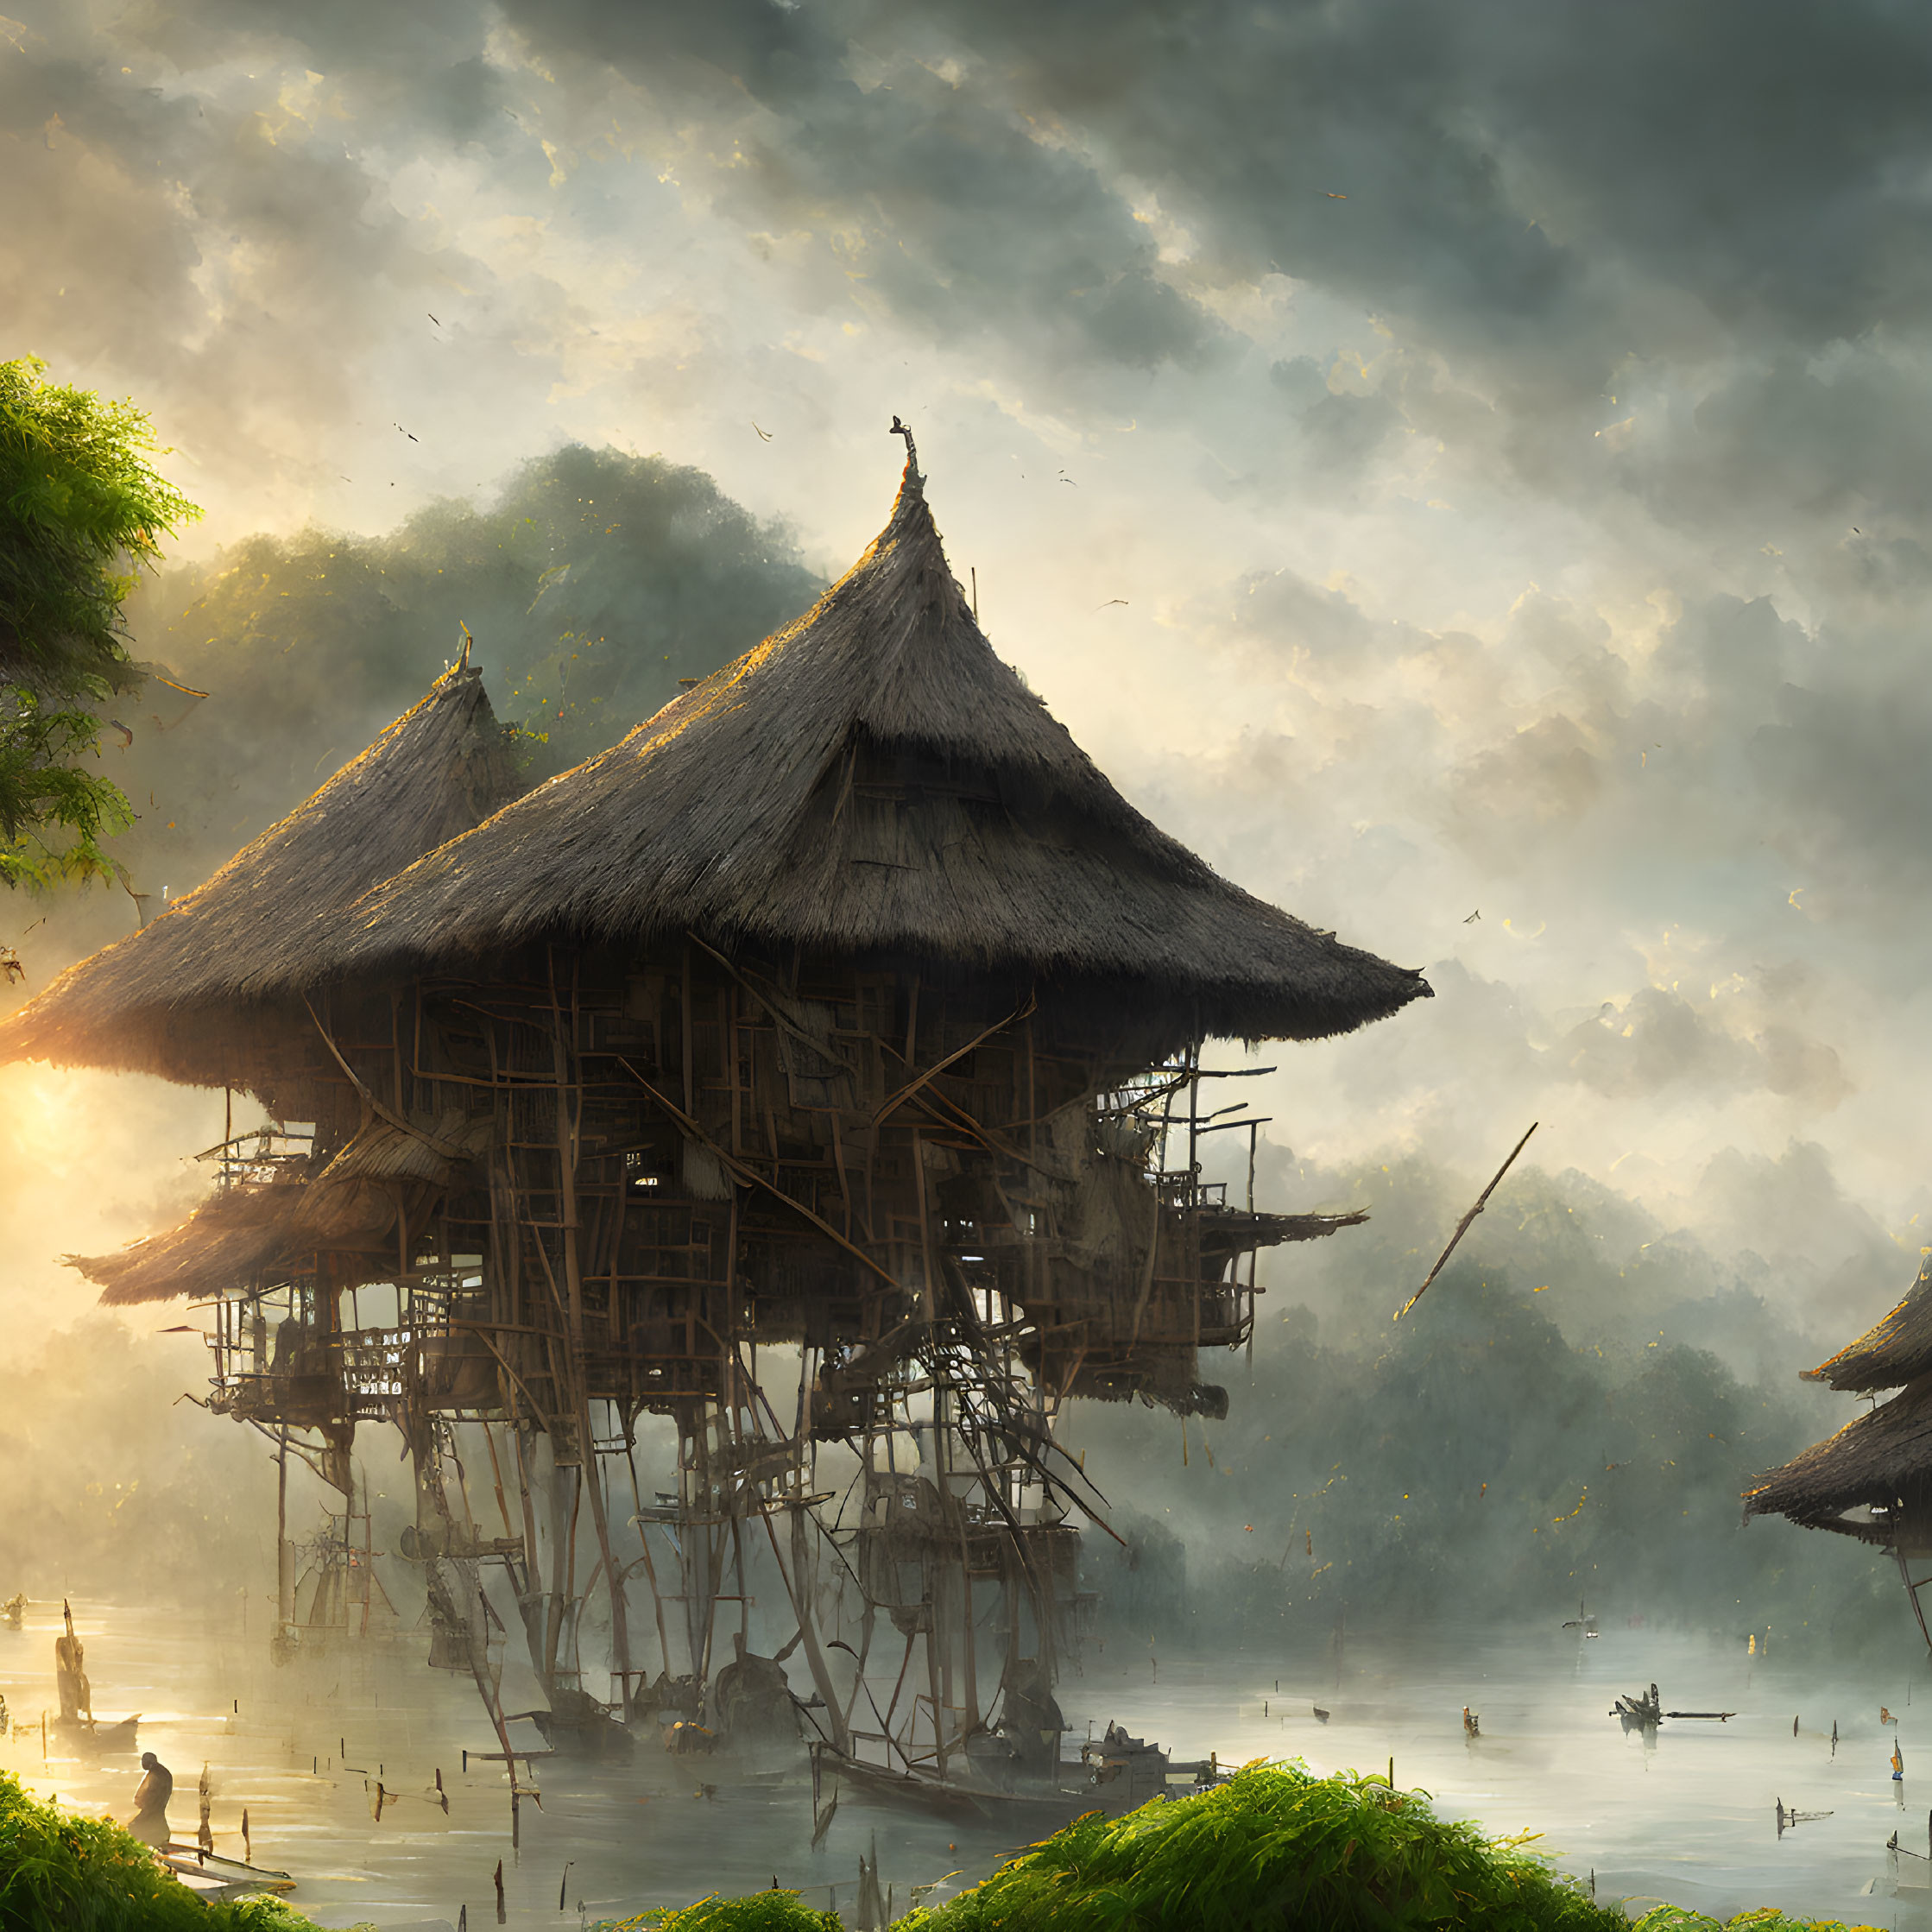 Riverside Thatched Huts in Misty Sunlit Jungle